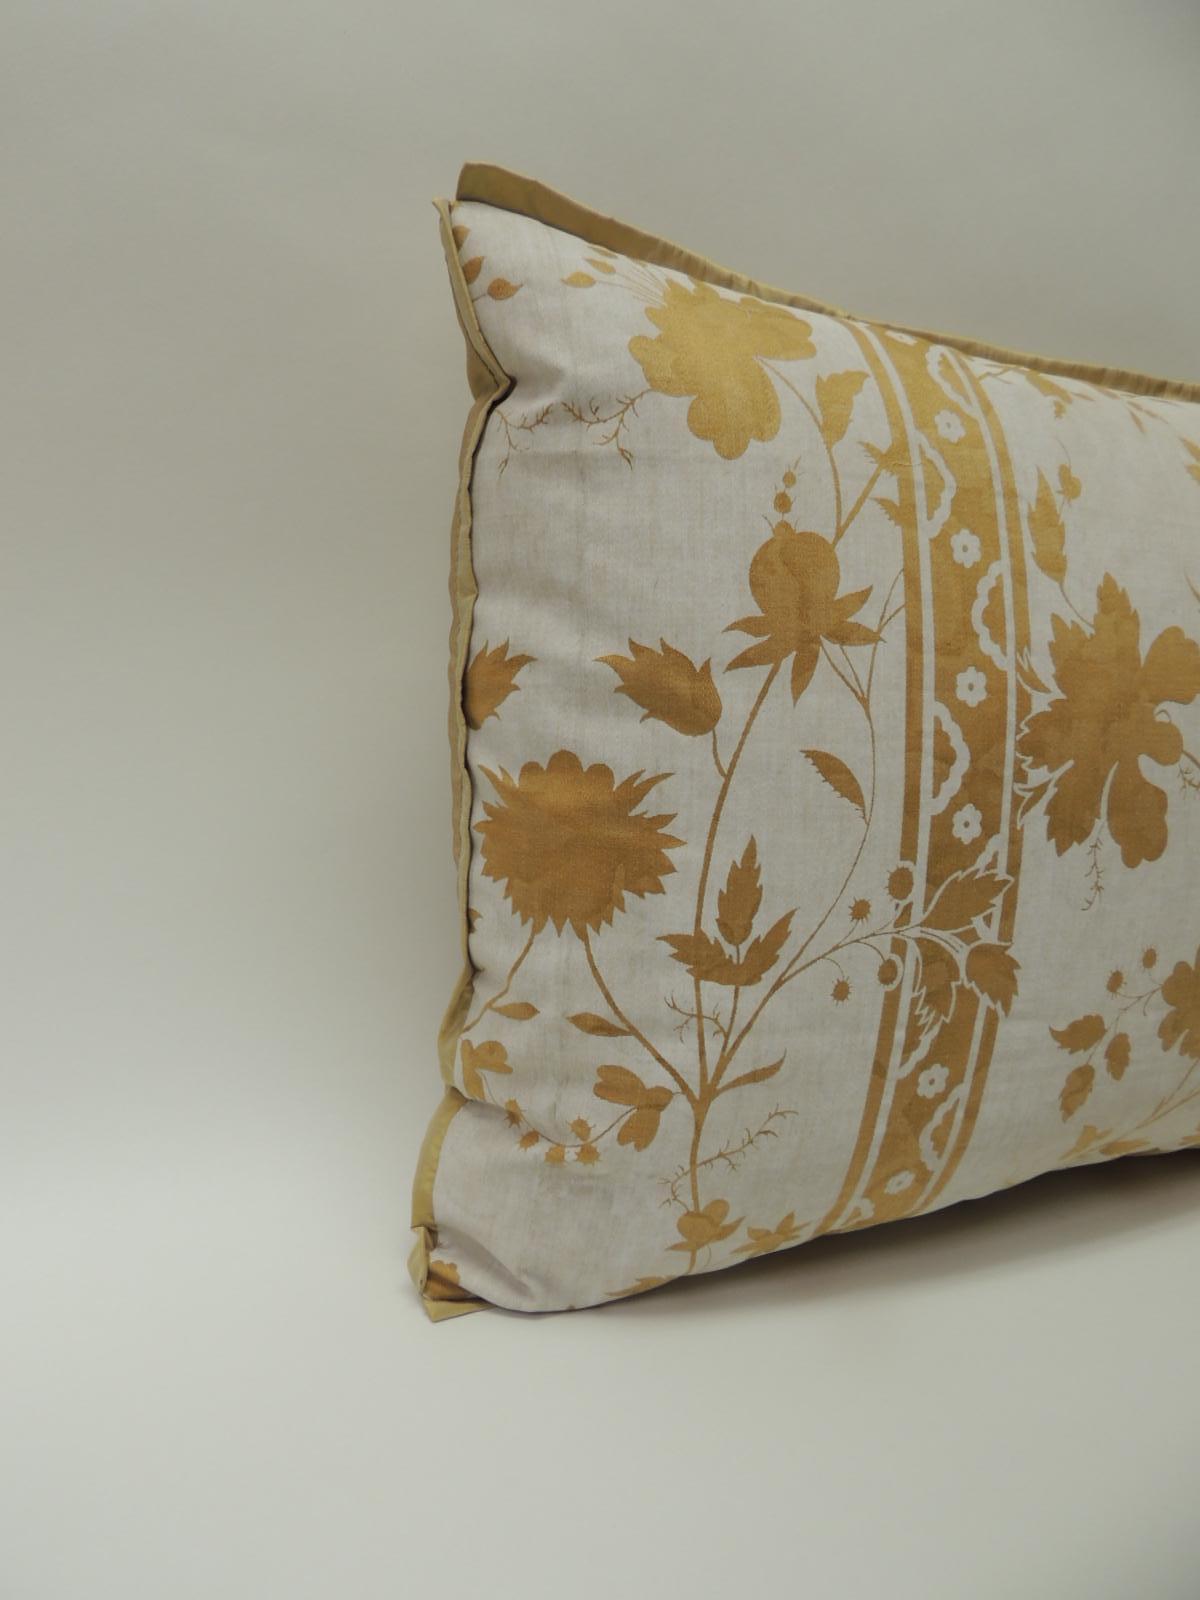 Vintage yellow and natural Fortuny stripes and flowers decorative handcrafted bolster pillow embellished with ATG custom flat golden silk trim, same silk as backing. Decorative bolster pillow handcrafted and designed in the USA. Throw bolster pillow